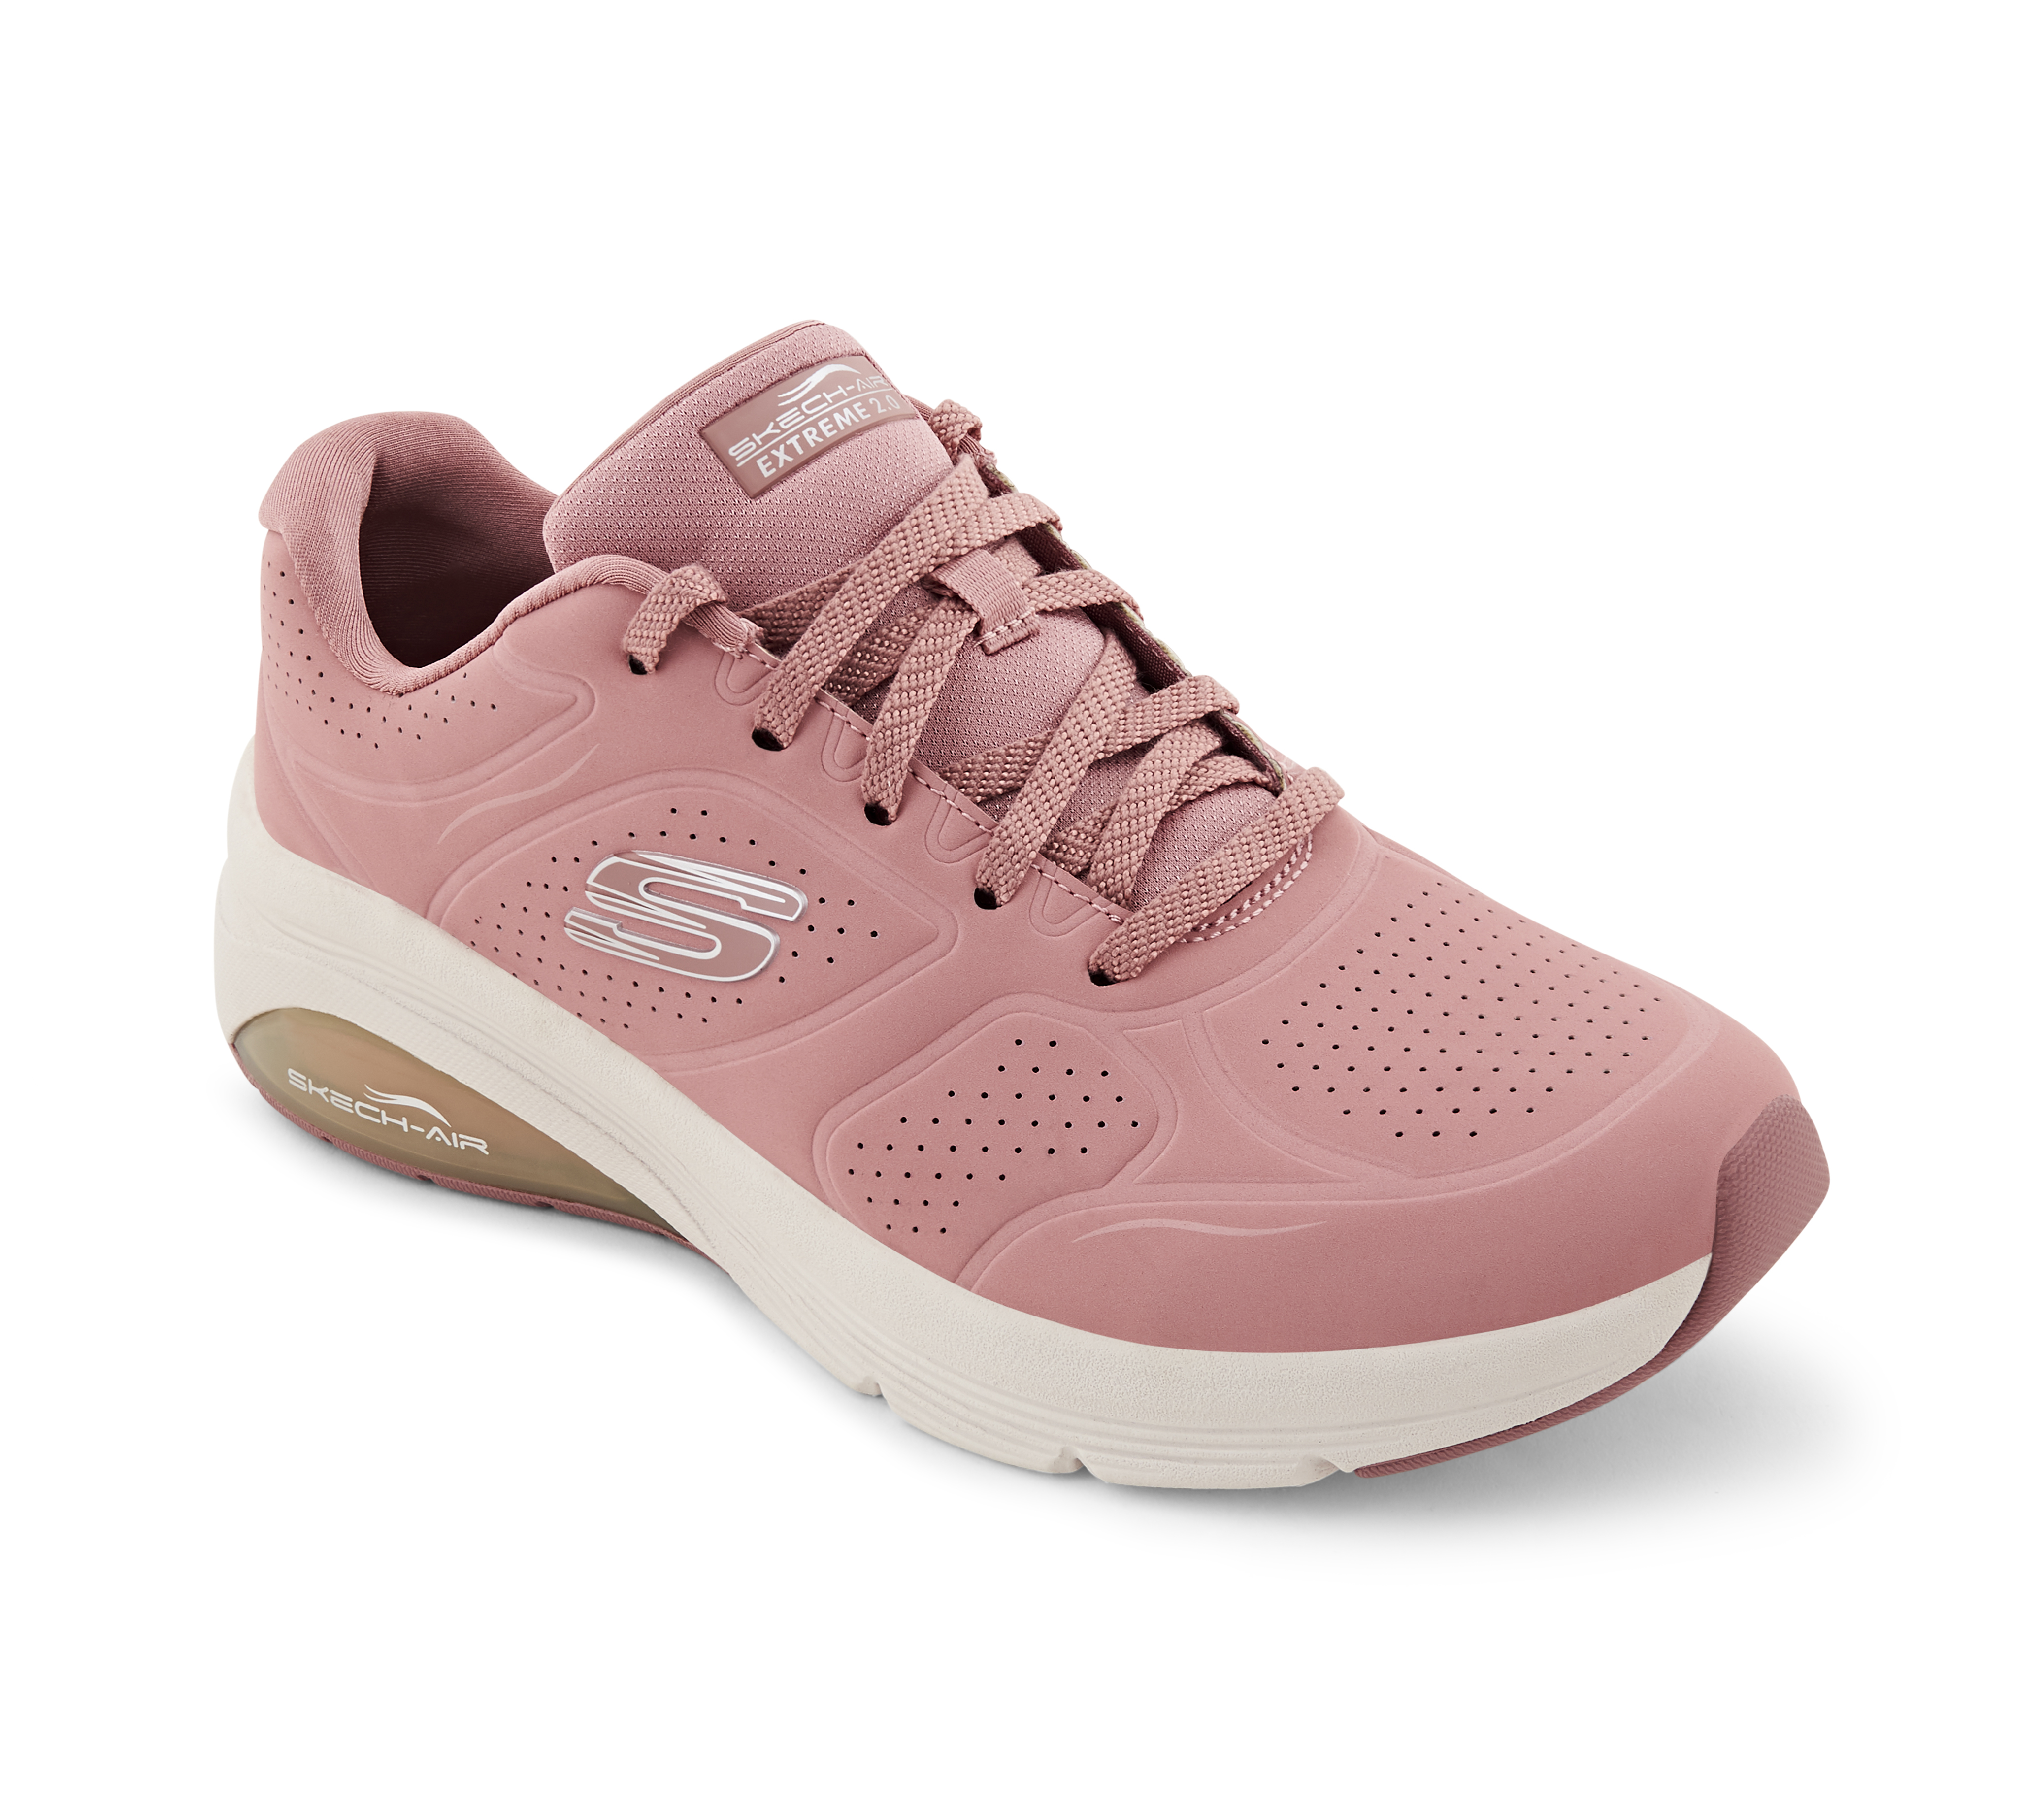 SKECH-AIR EXTREME 2.0-CLASSIC, ROSE Footwear Lateral View